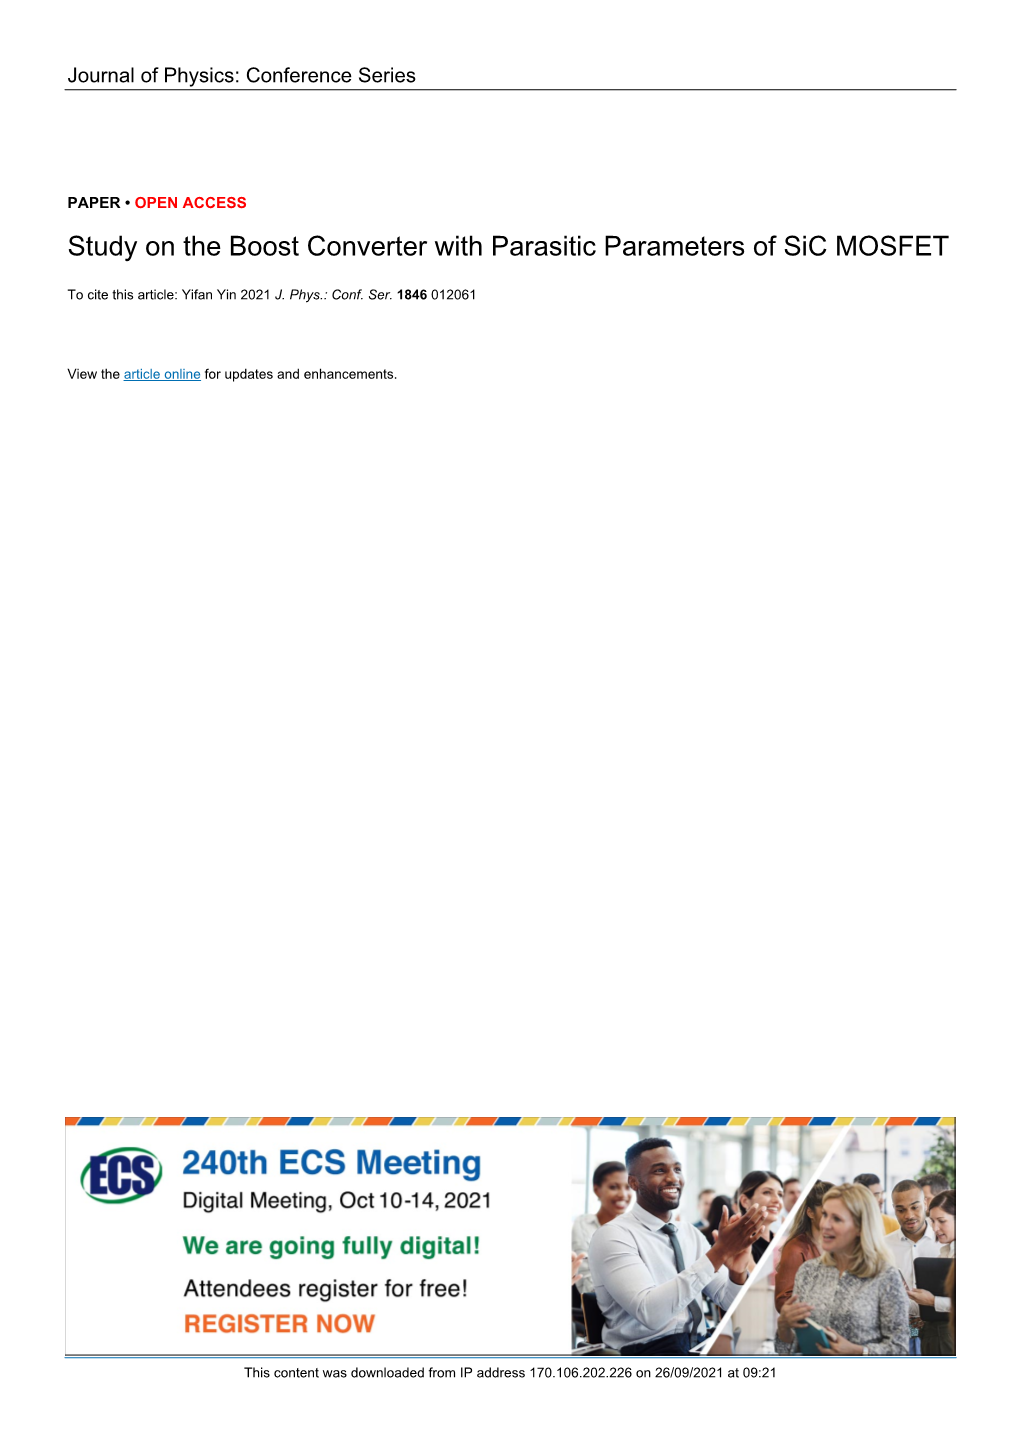 Study on the Boost Converter with Parasitic Parameters of Sic MOSFET